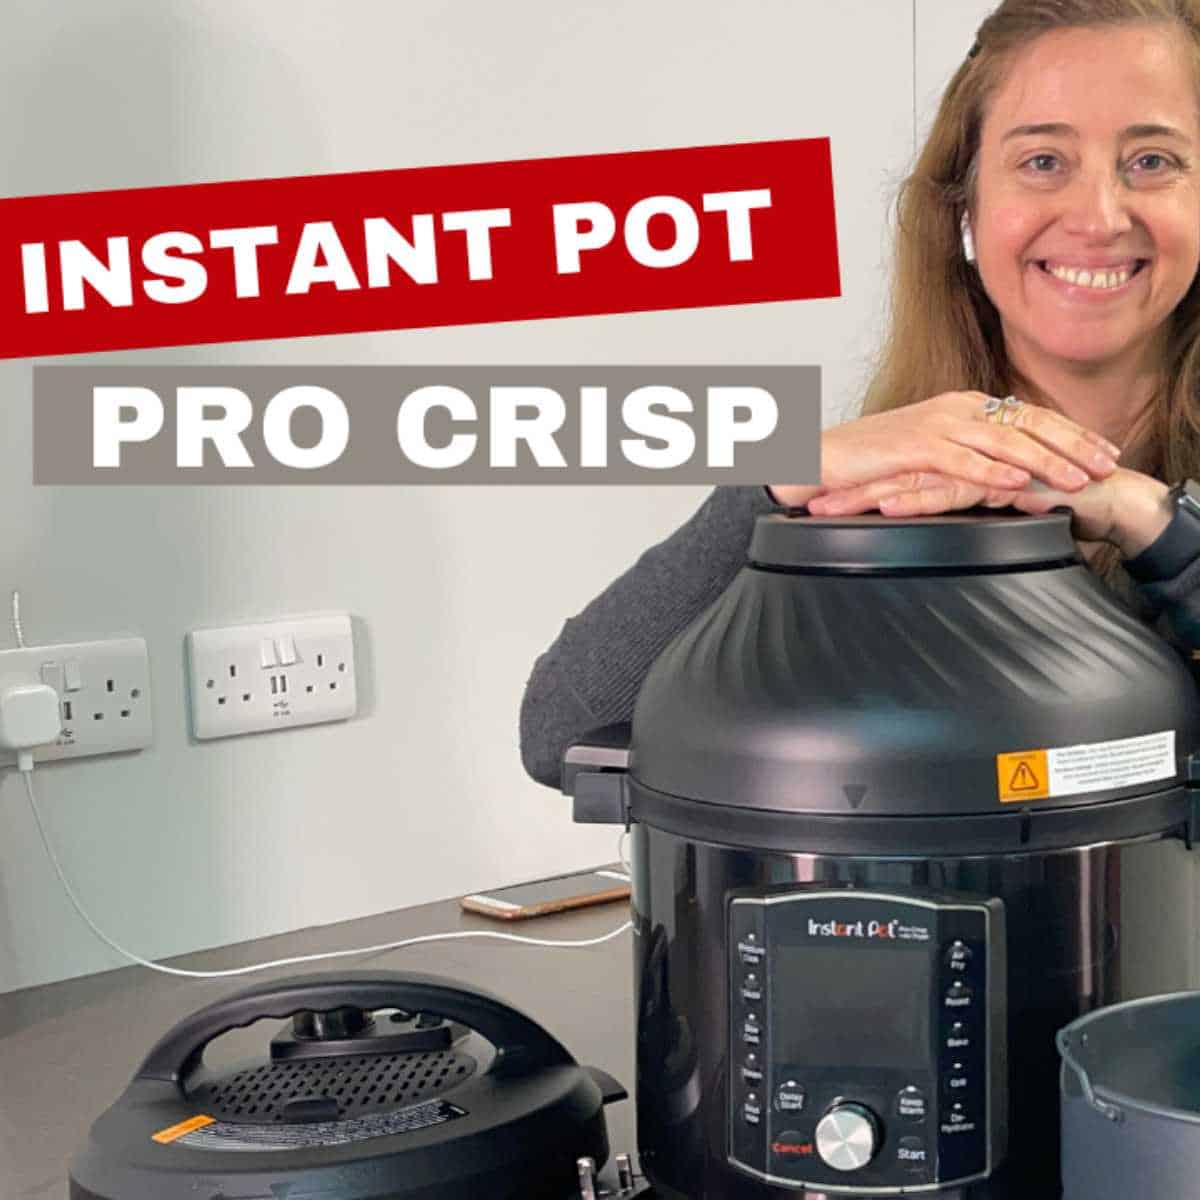 Photo of Maria from Feisty Tapas behind an Instant Pot Pro Crisp